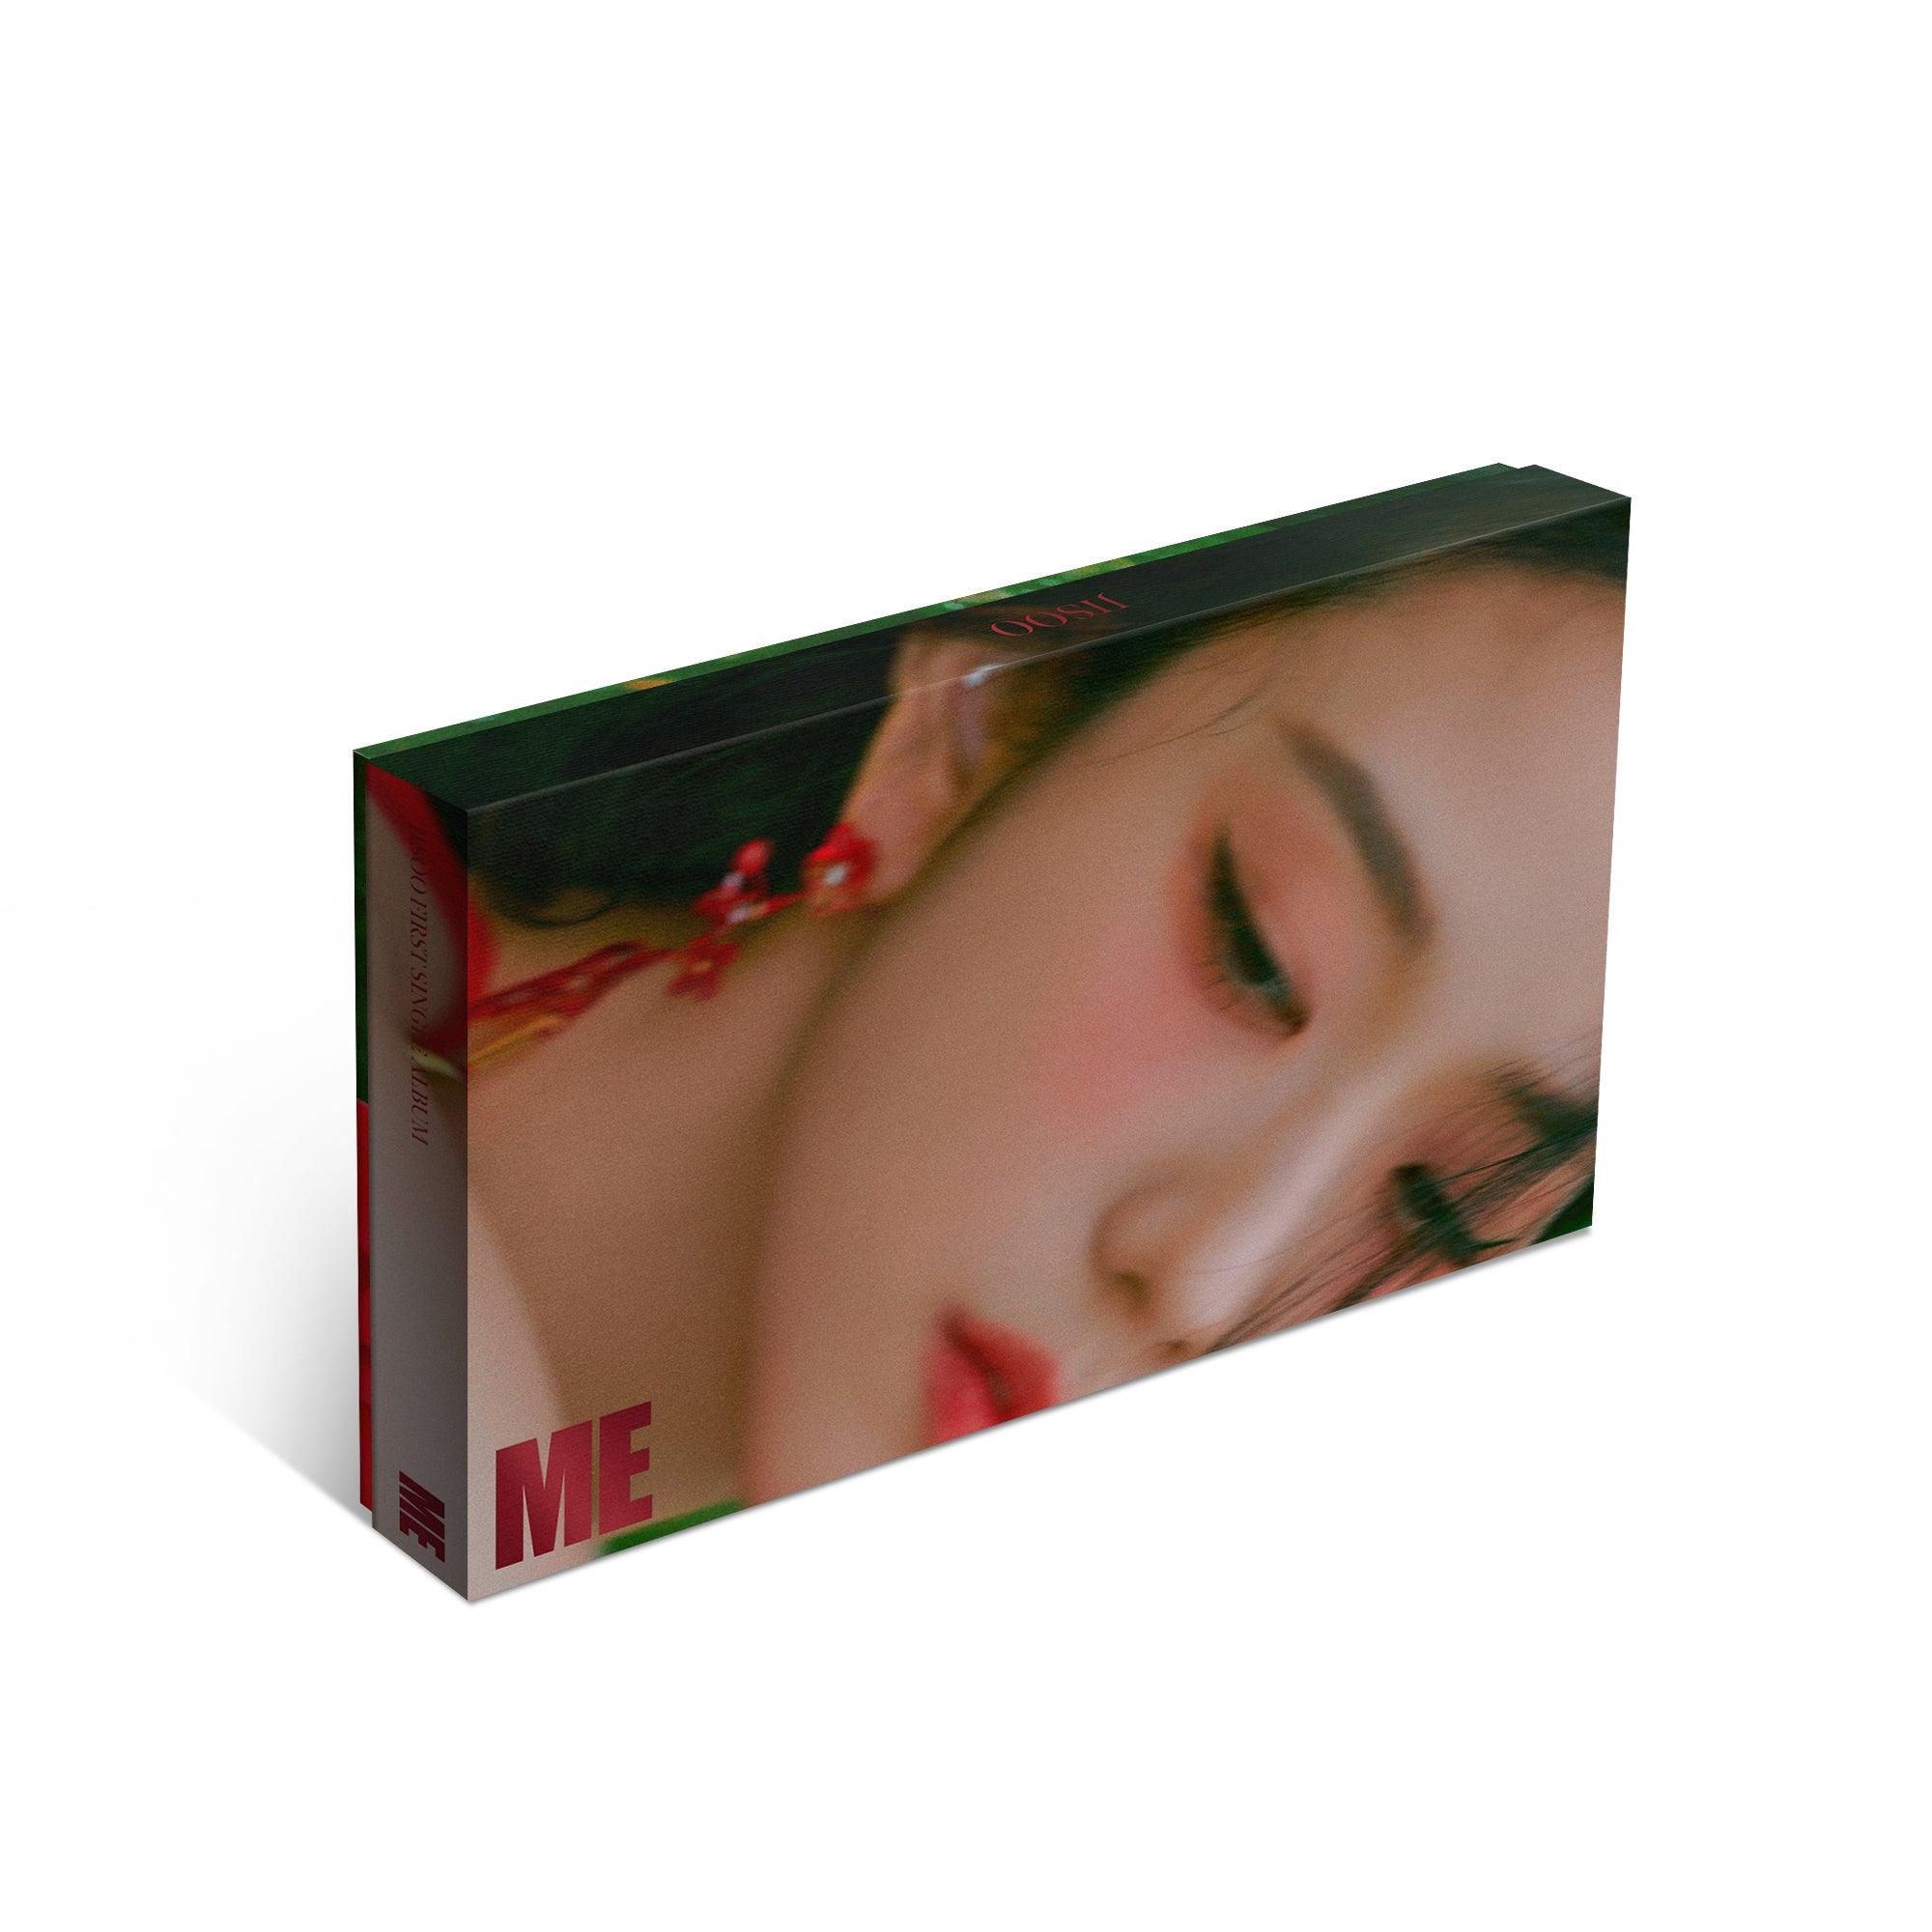 [PRE-ORDER] JISOO - FIRST SINGLE ALBUM RED Ver. - Shopping Around the World with Goodsnjoy